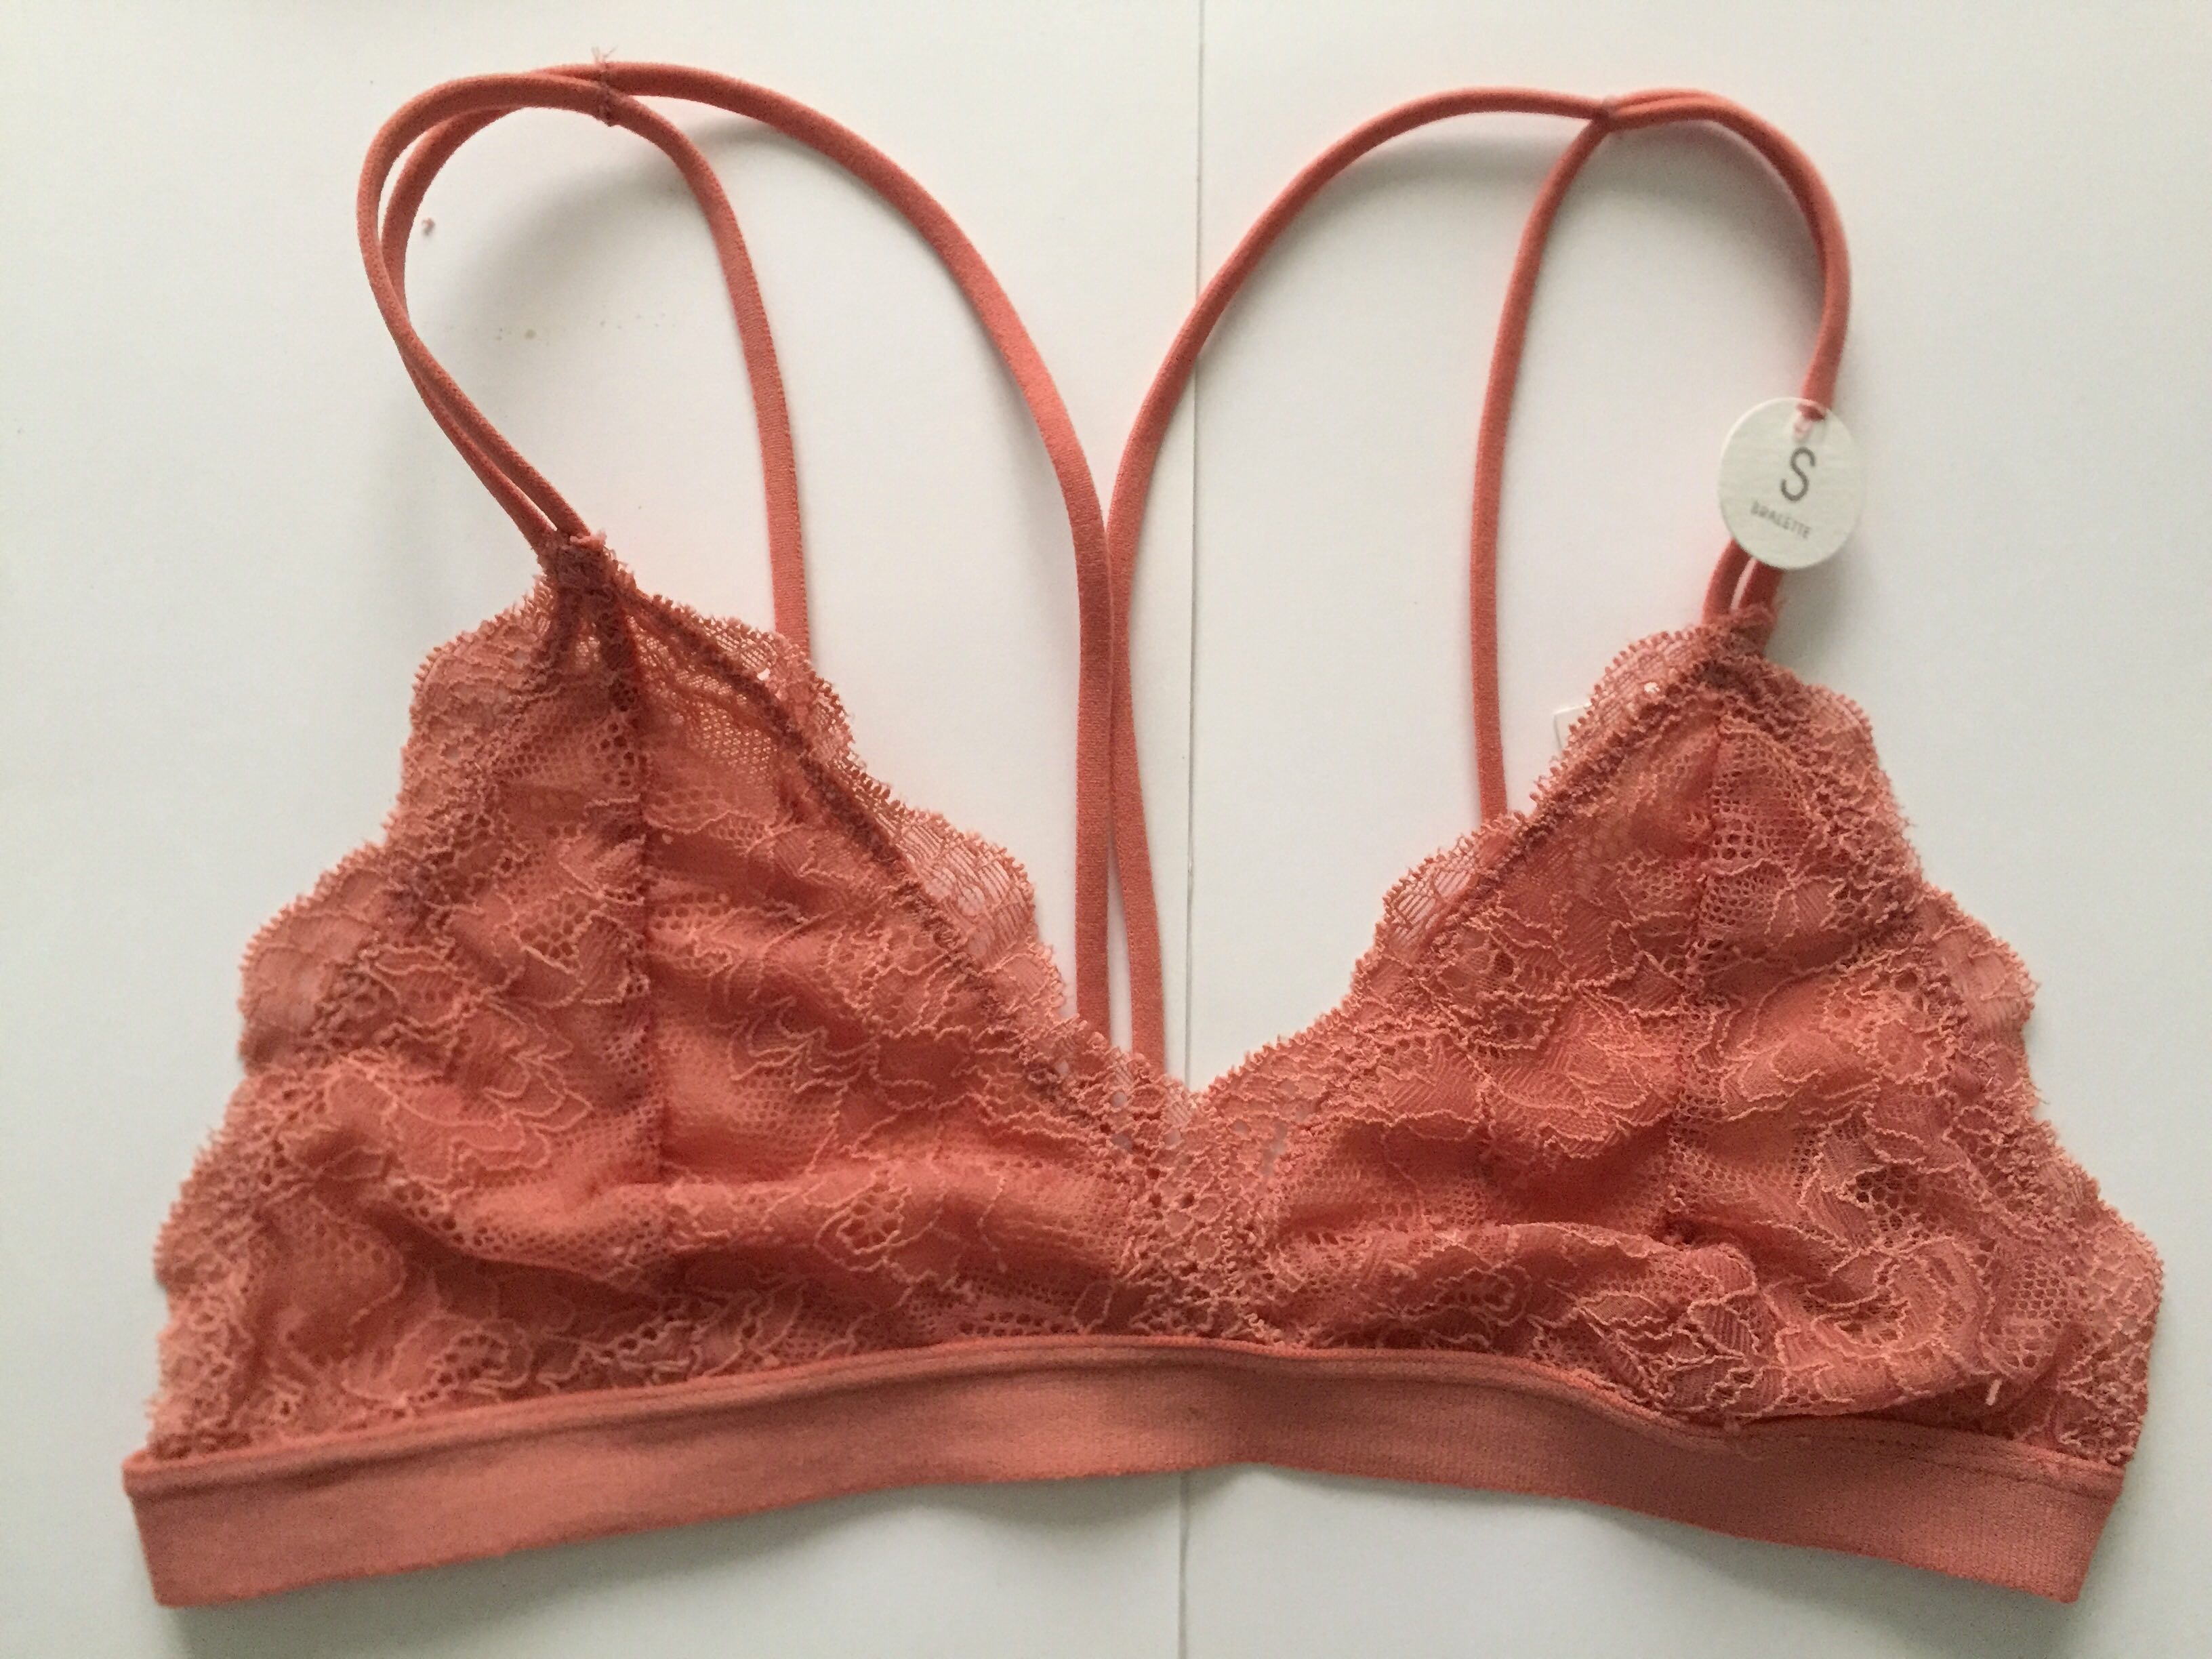 https://media.karousell.com/media/photos/products/2018/07/02/brand_new_cotton_on_body_v_lace_bralette_1530502739_ddf0d3cf.jpg